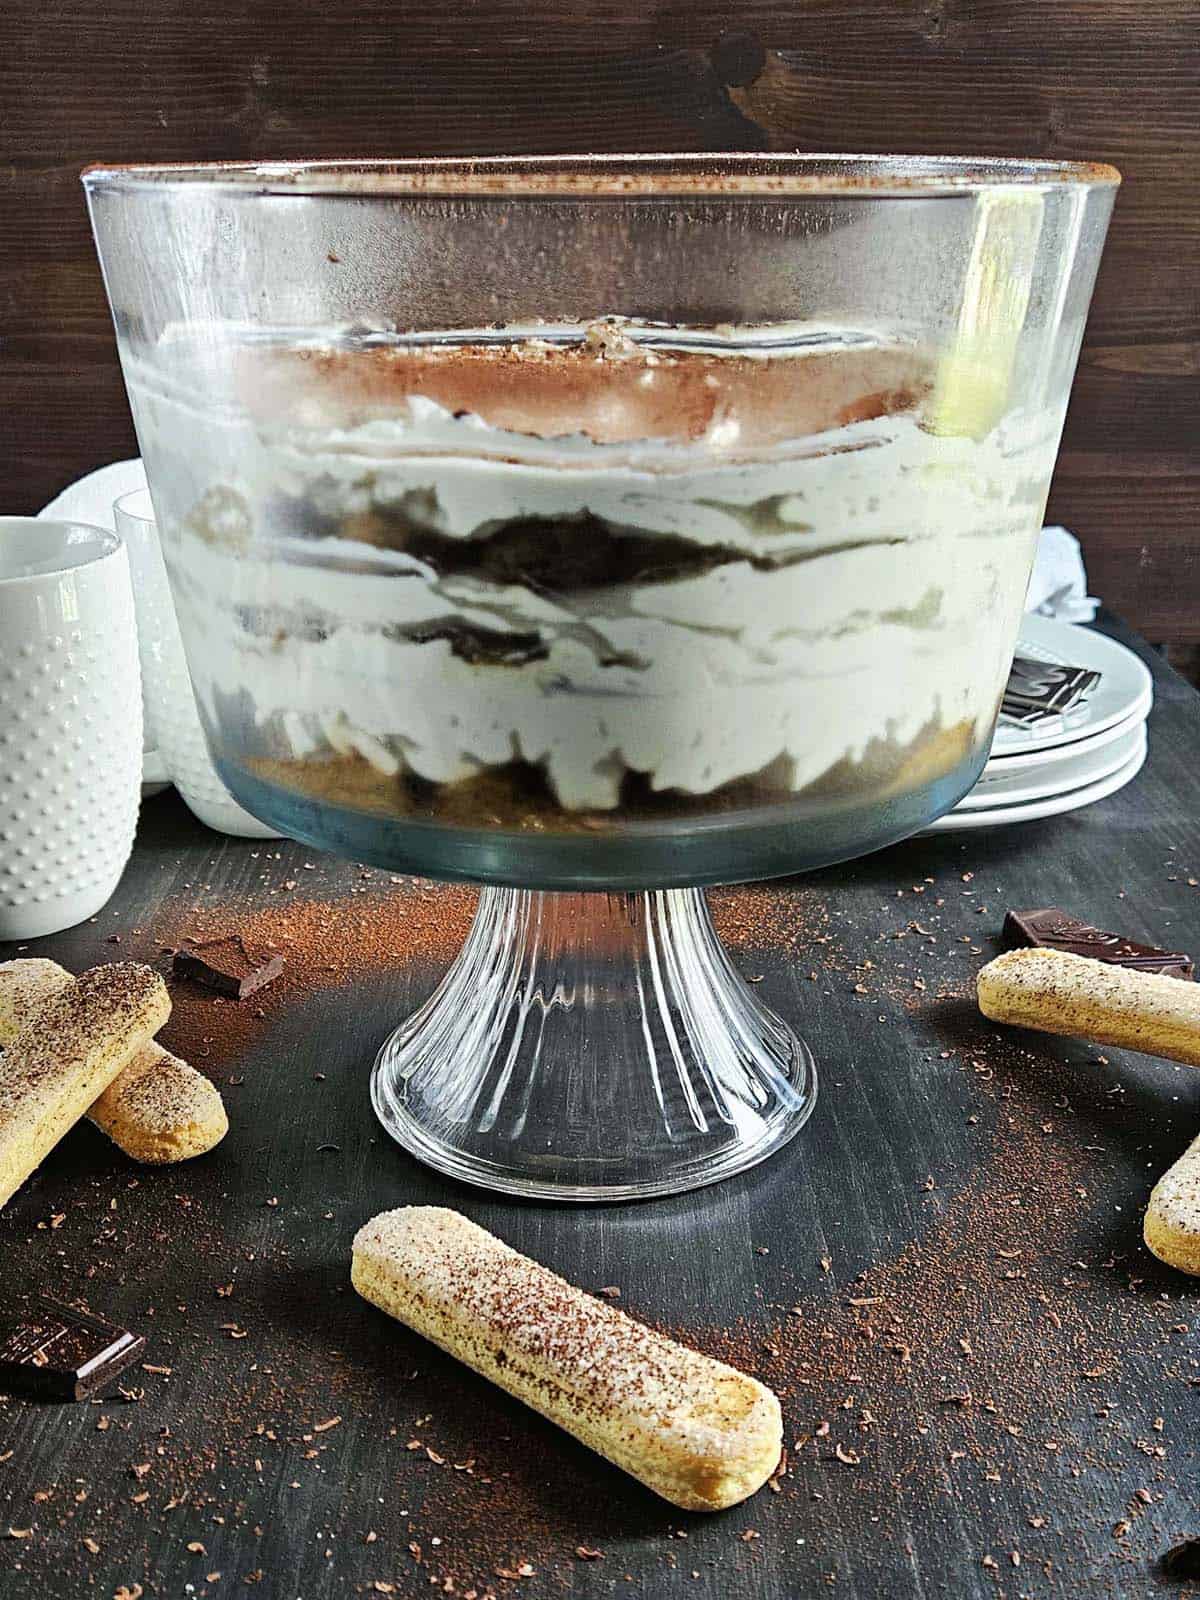 Tiramisu in a trifle dish with lady fingers and cocoa scattered around on a dark surface.